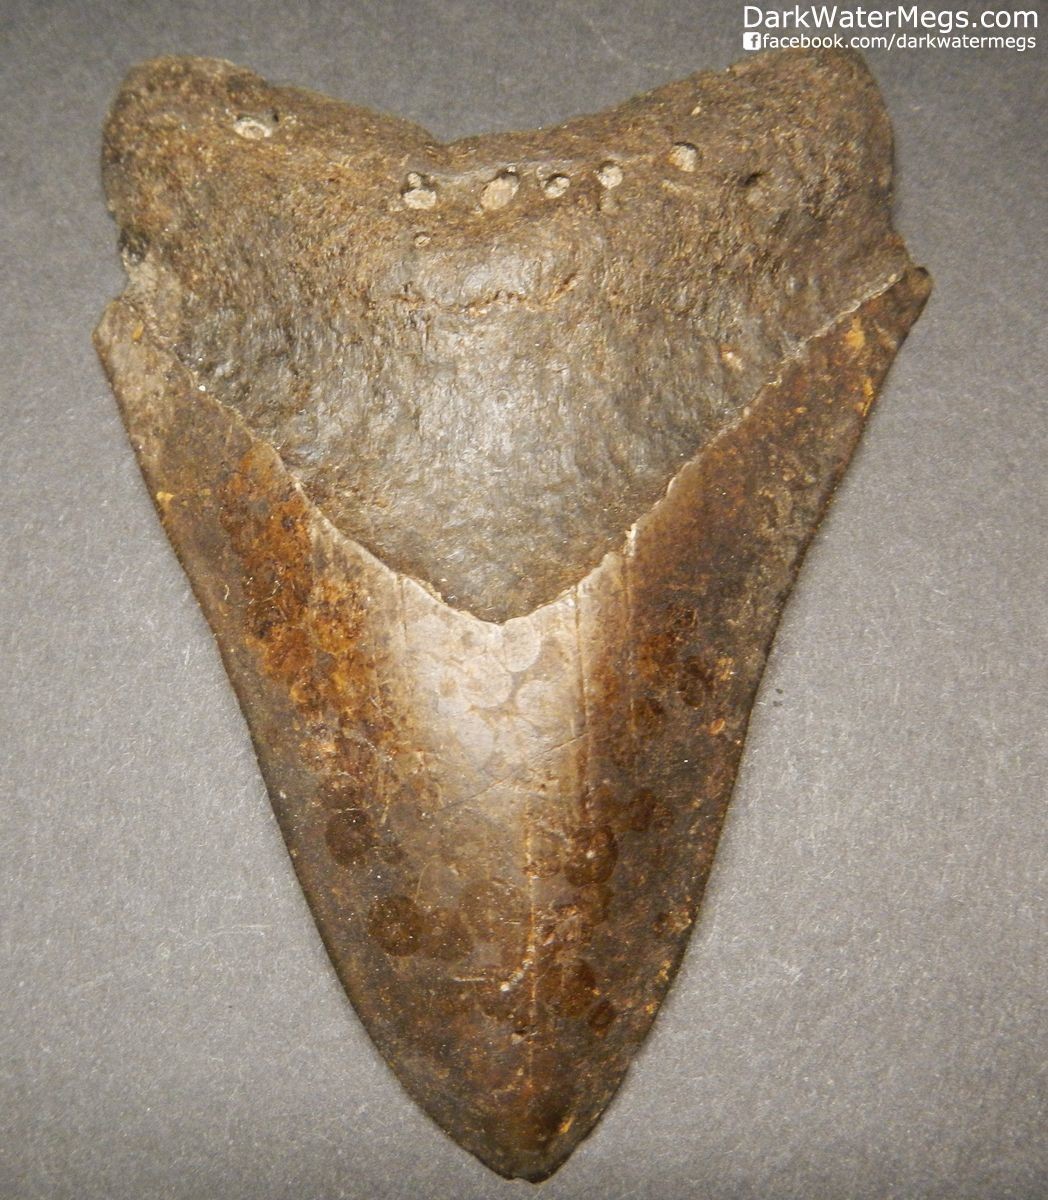 4.31" Tan and Brown Megalodon Tooth